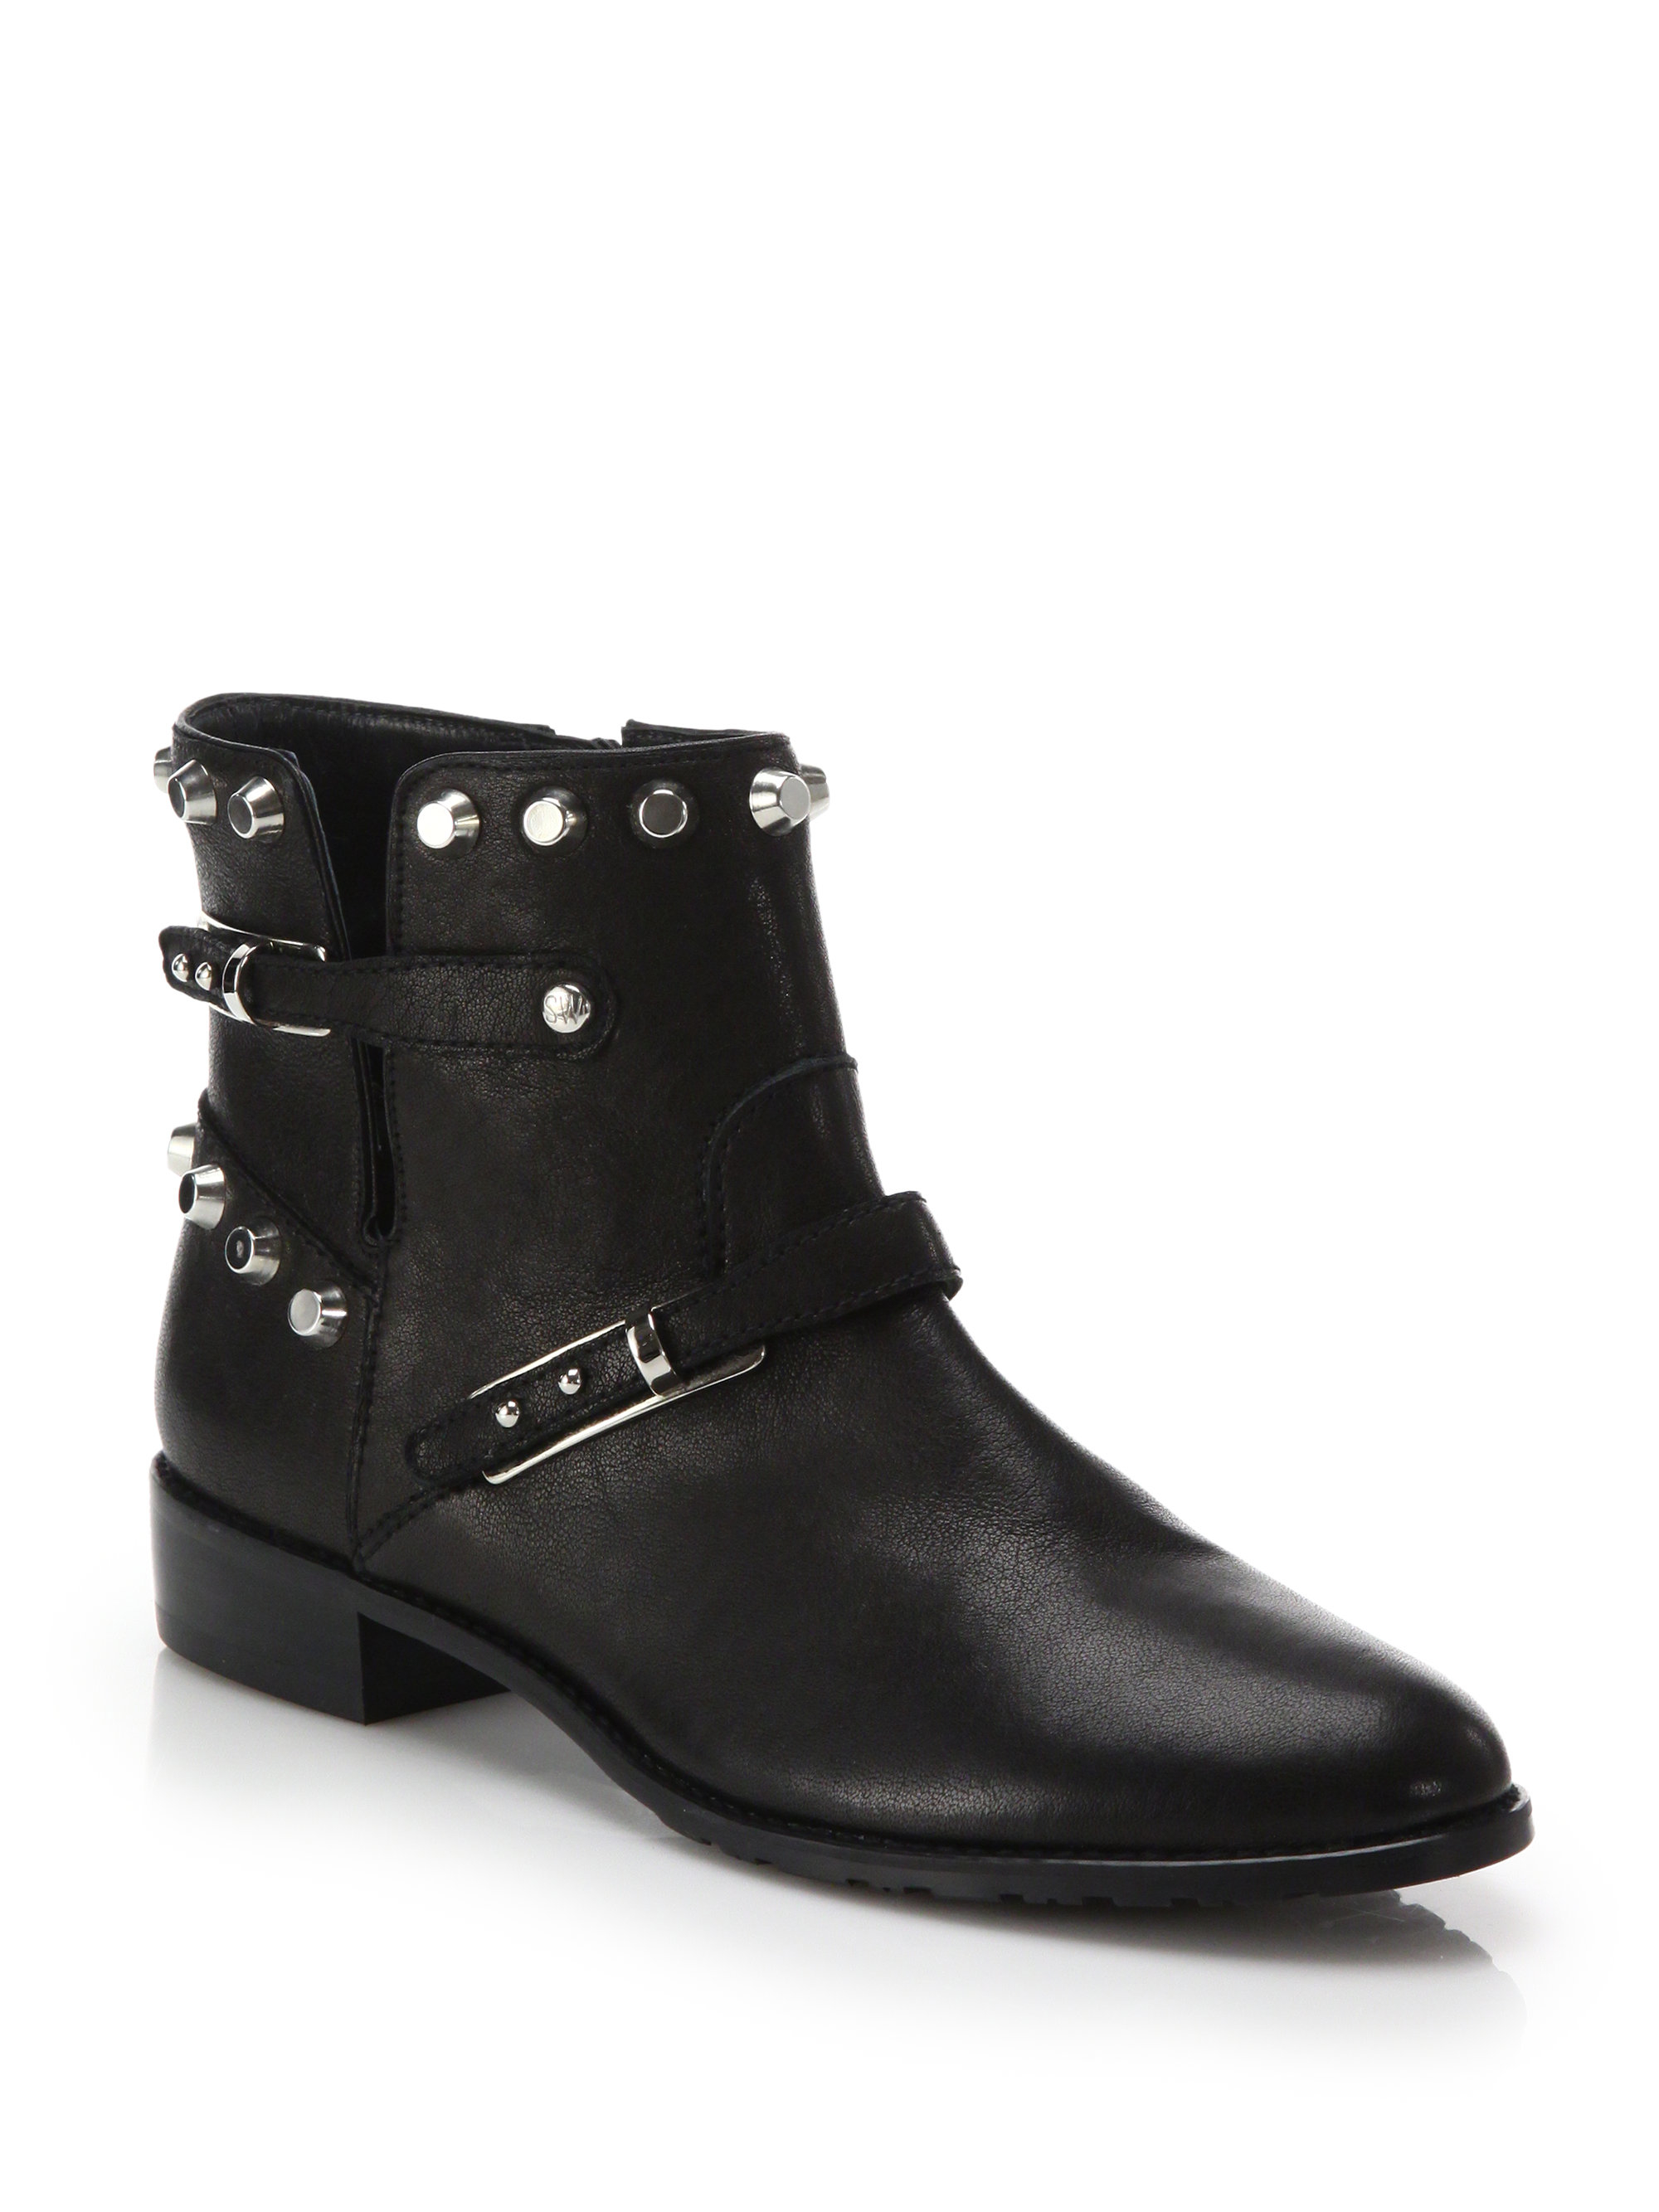 Stuart Weitzman Go West Studded Leather Ankle Boots in Black | Lyst